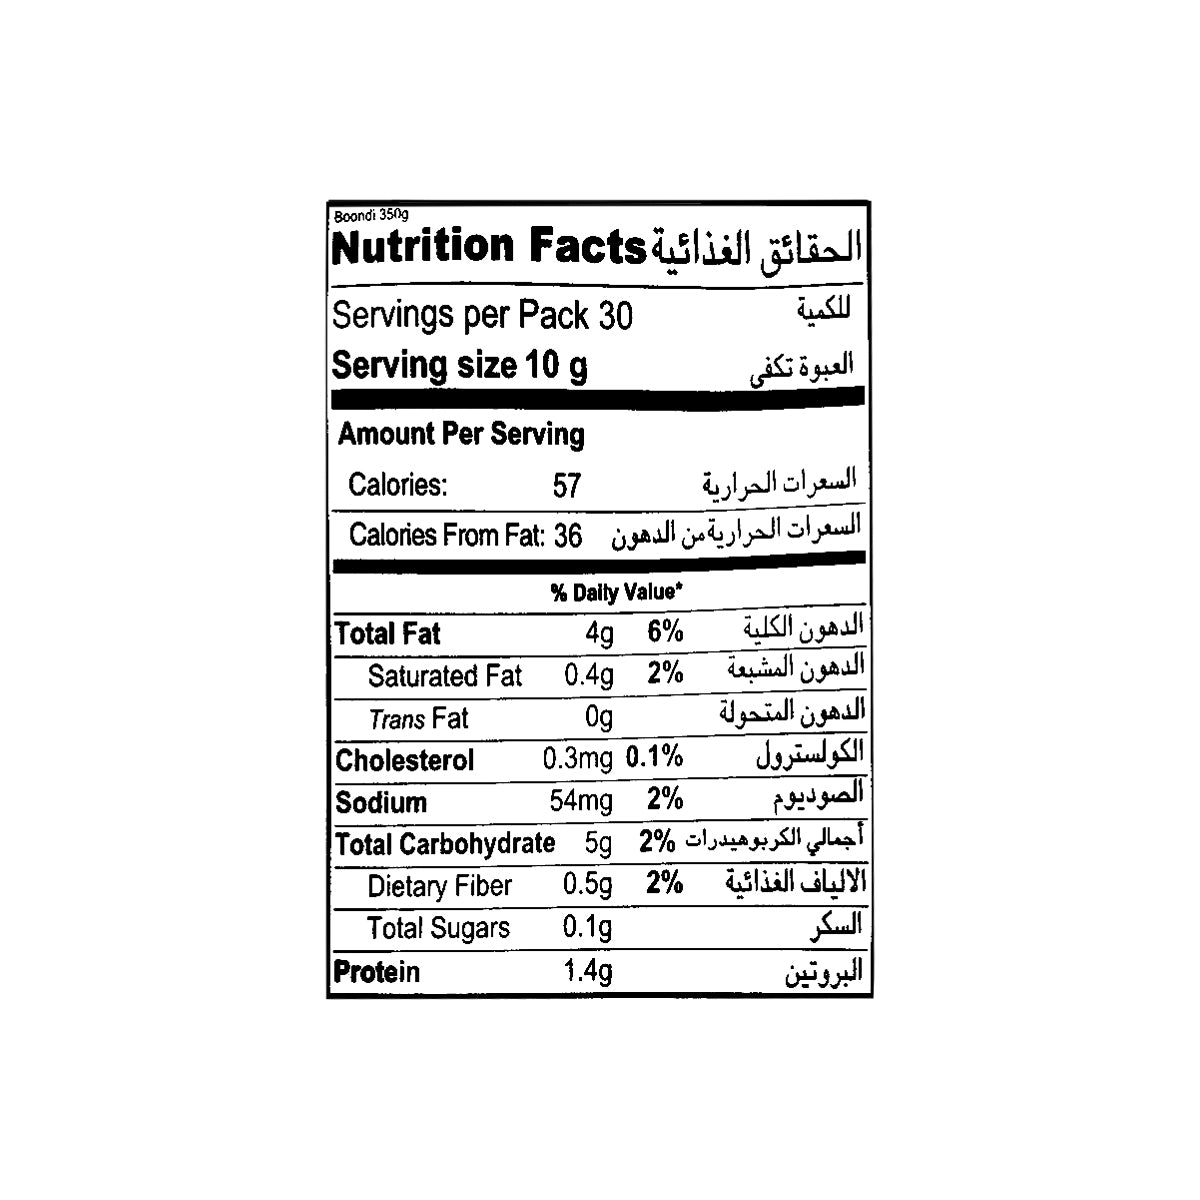 Nutritional facts United King Boondi 